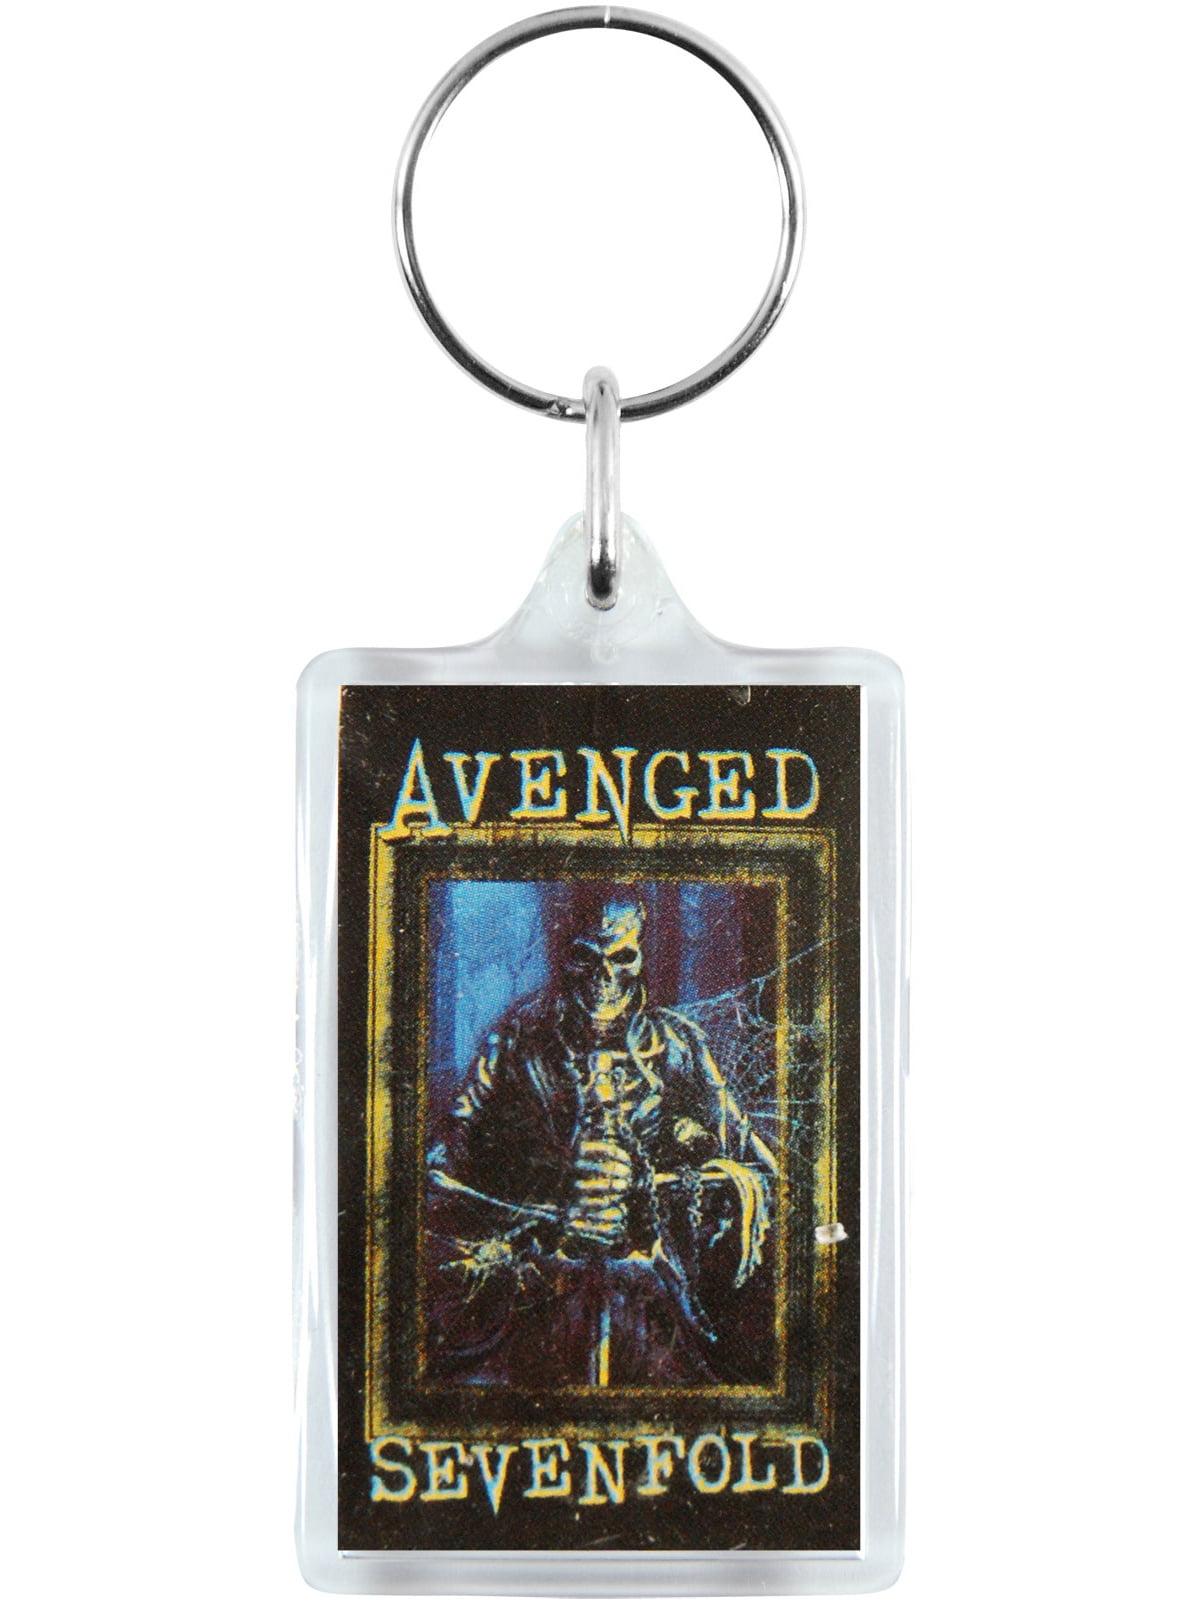 Avenged Sevenfold Shepherd Of Fire Keychain Official Band Music 